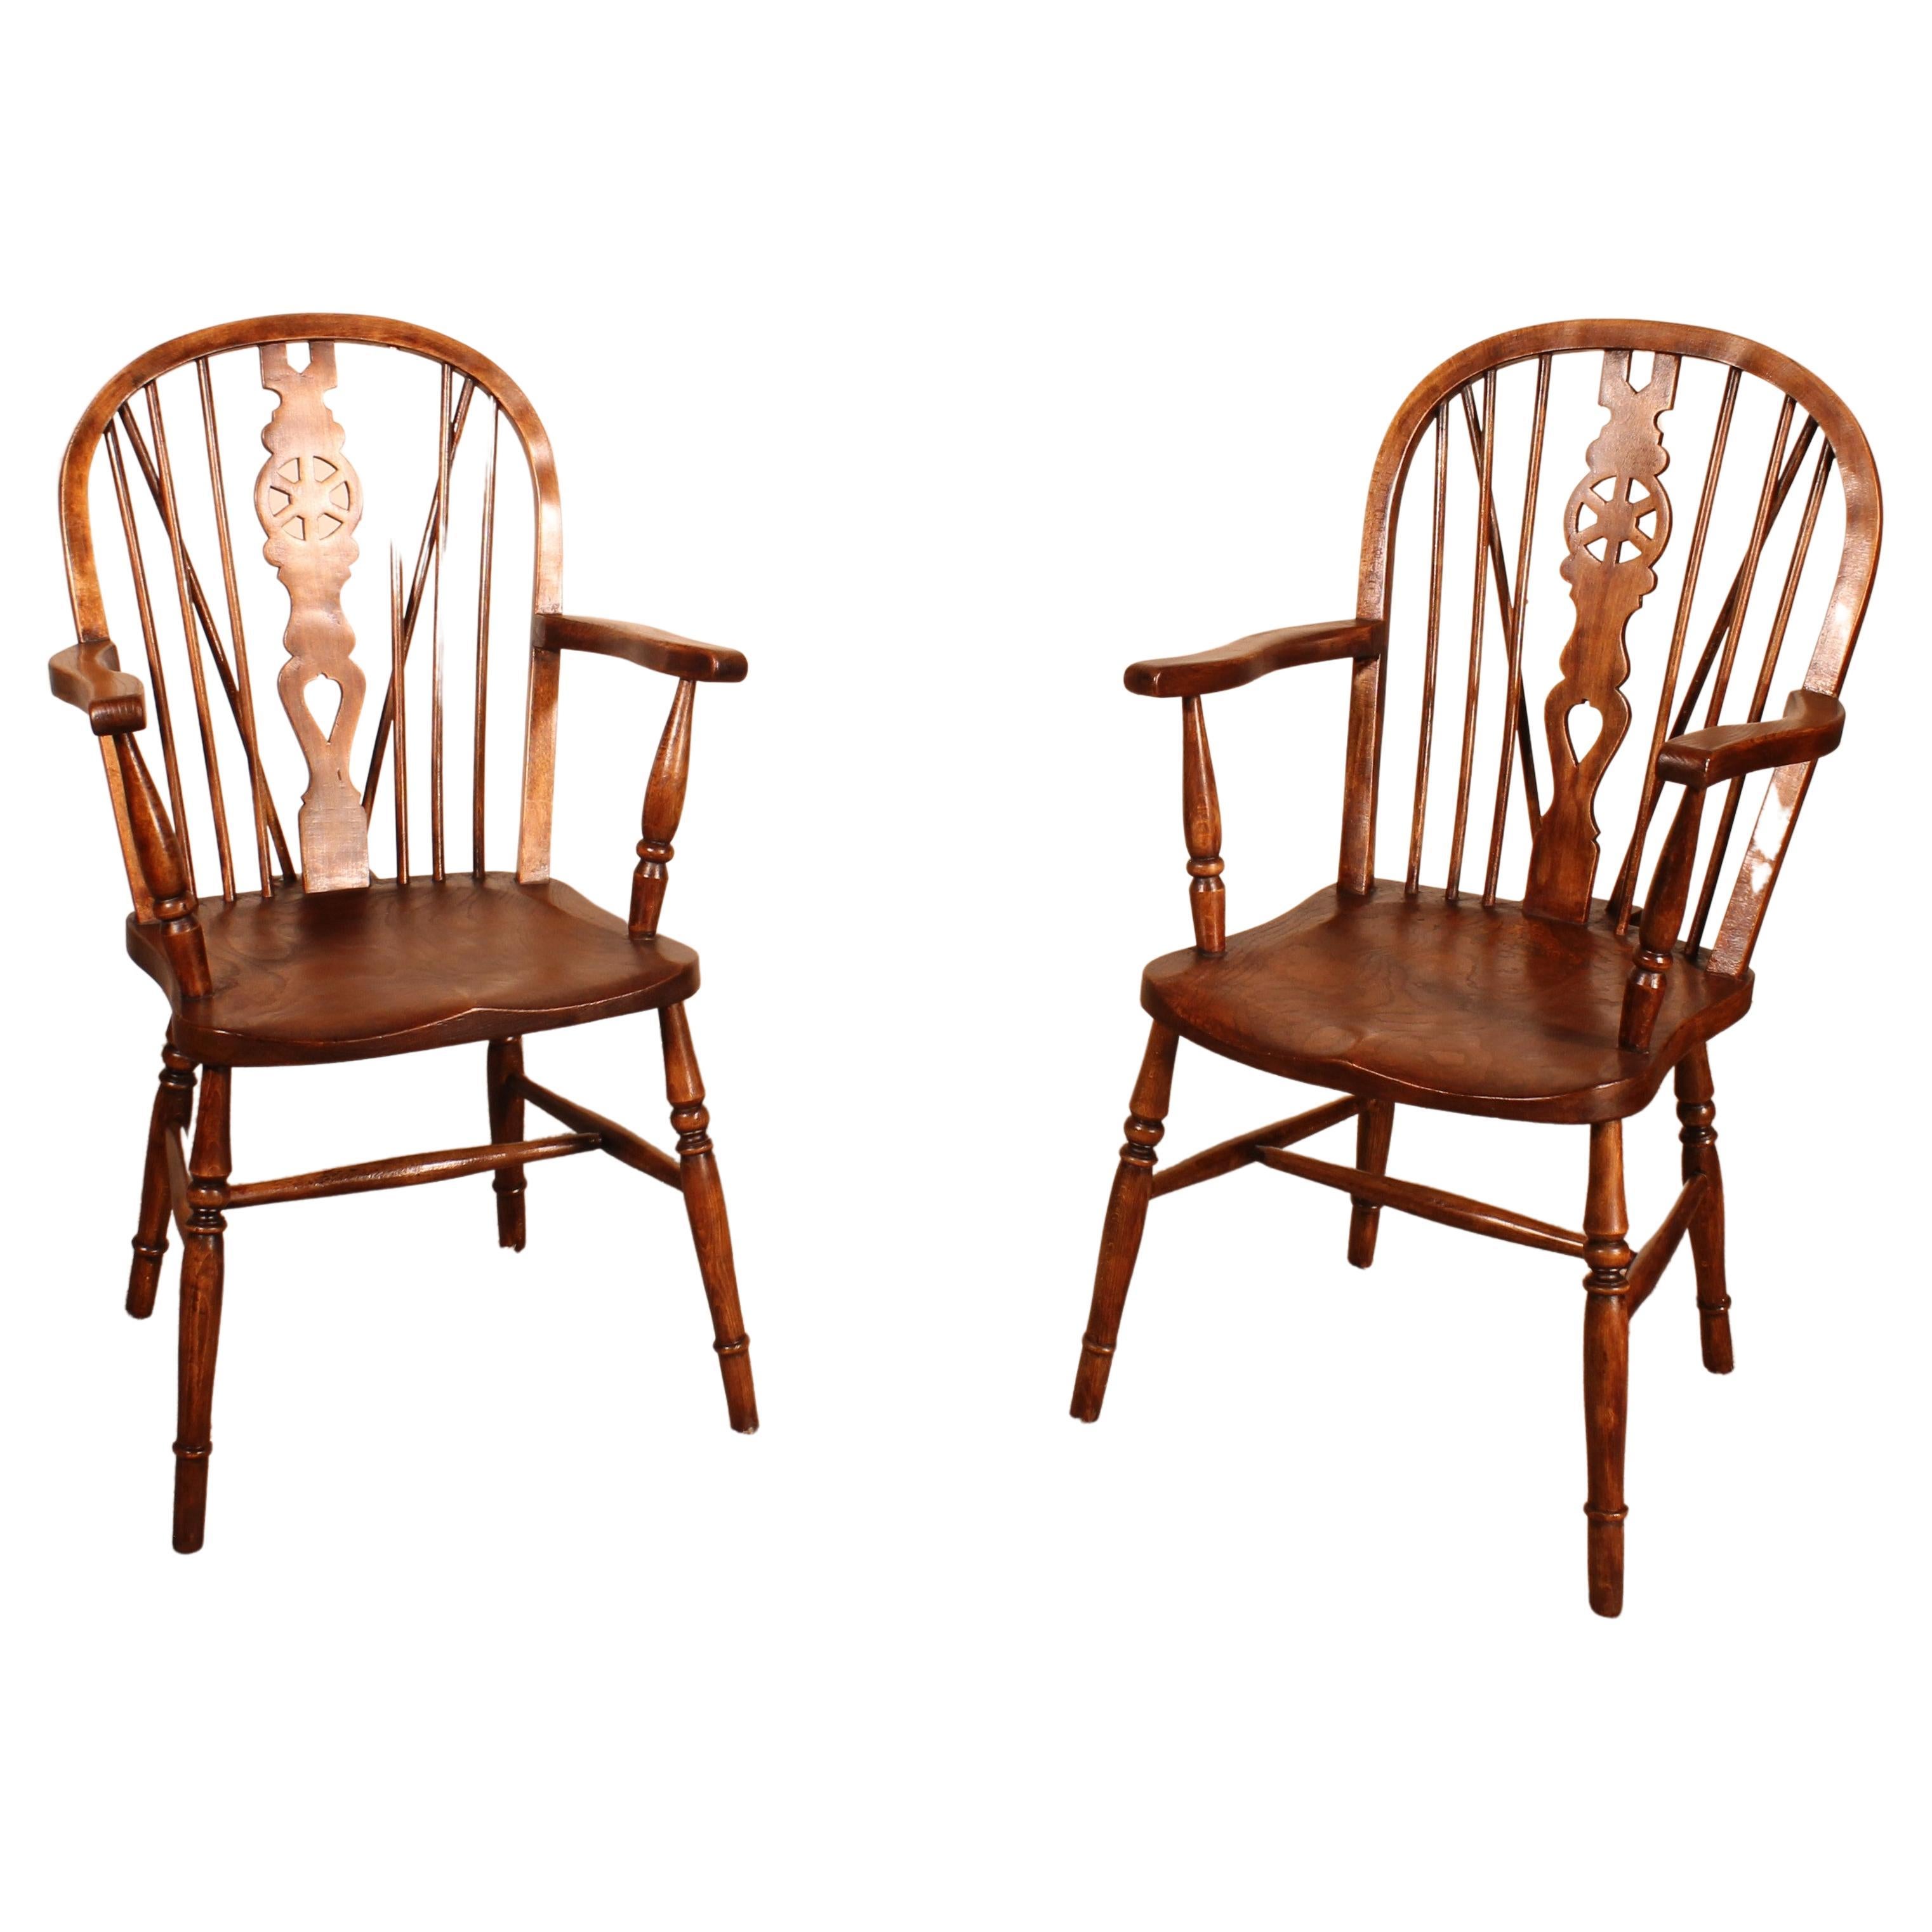 Pair of English Windsor Armchairs from the 19th Century